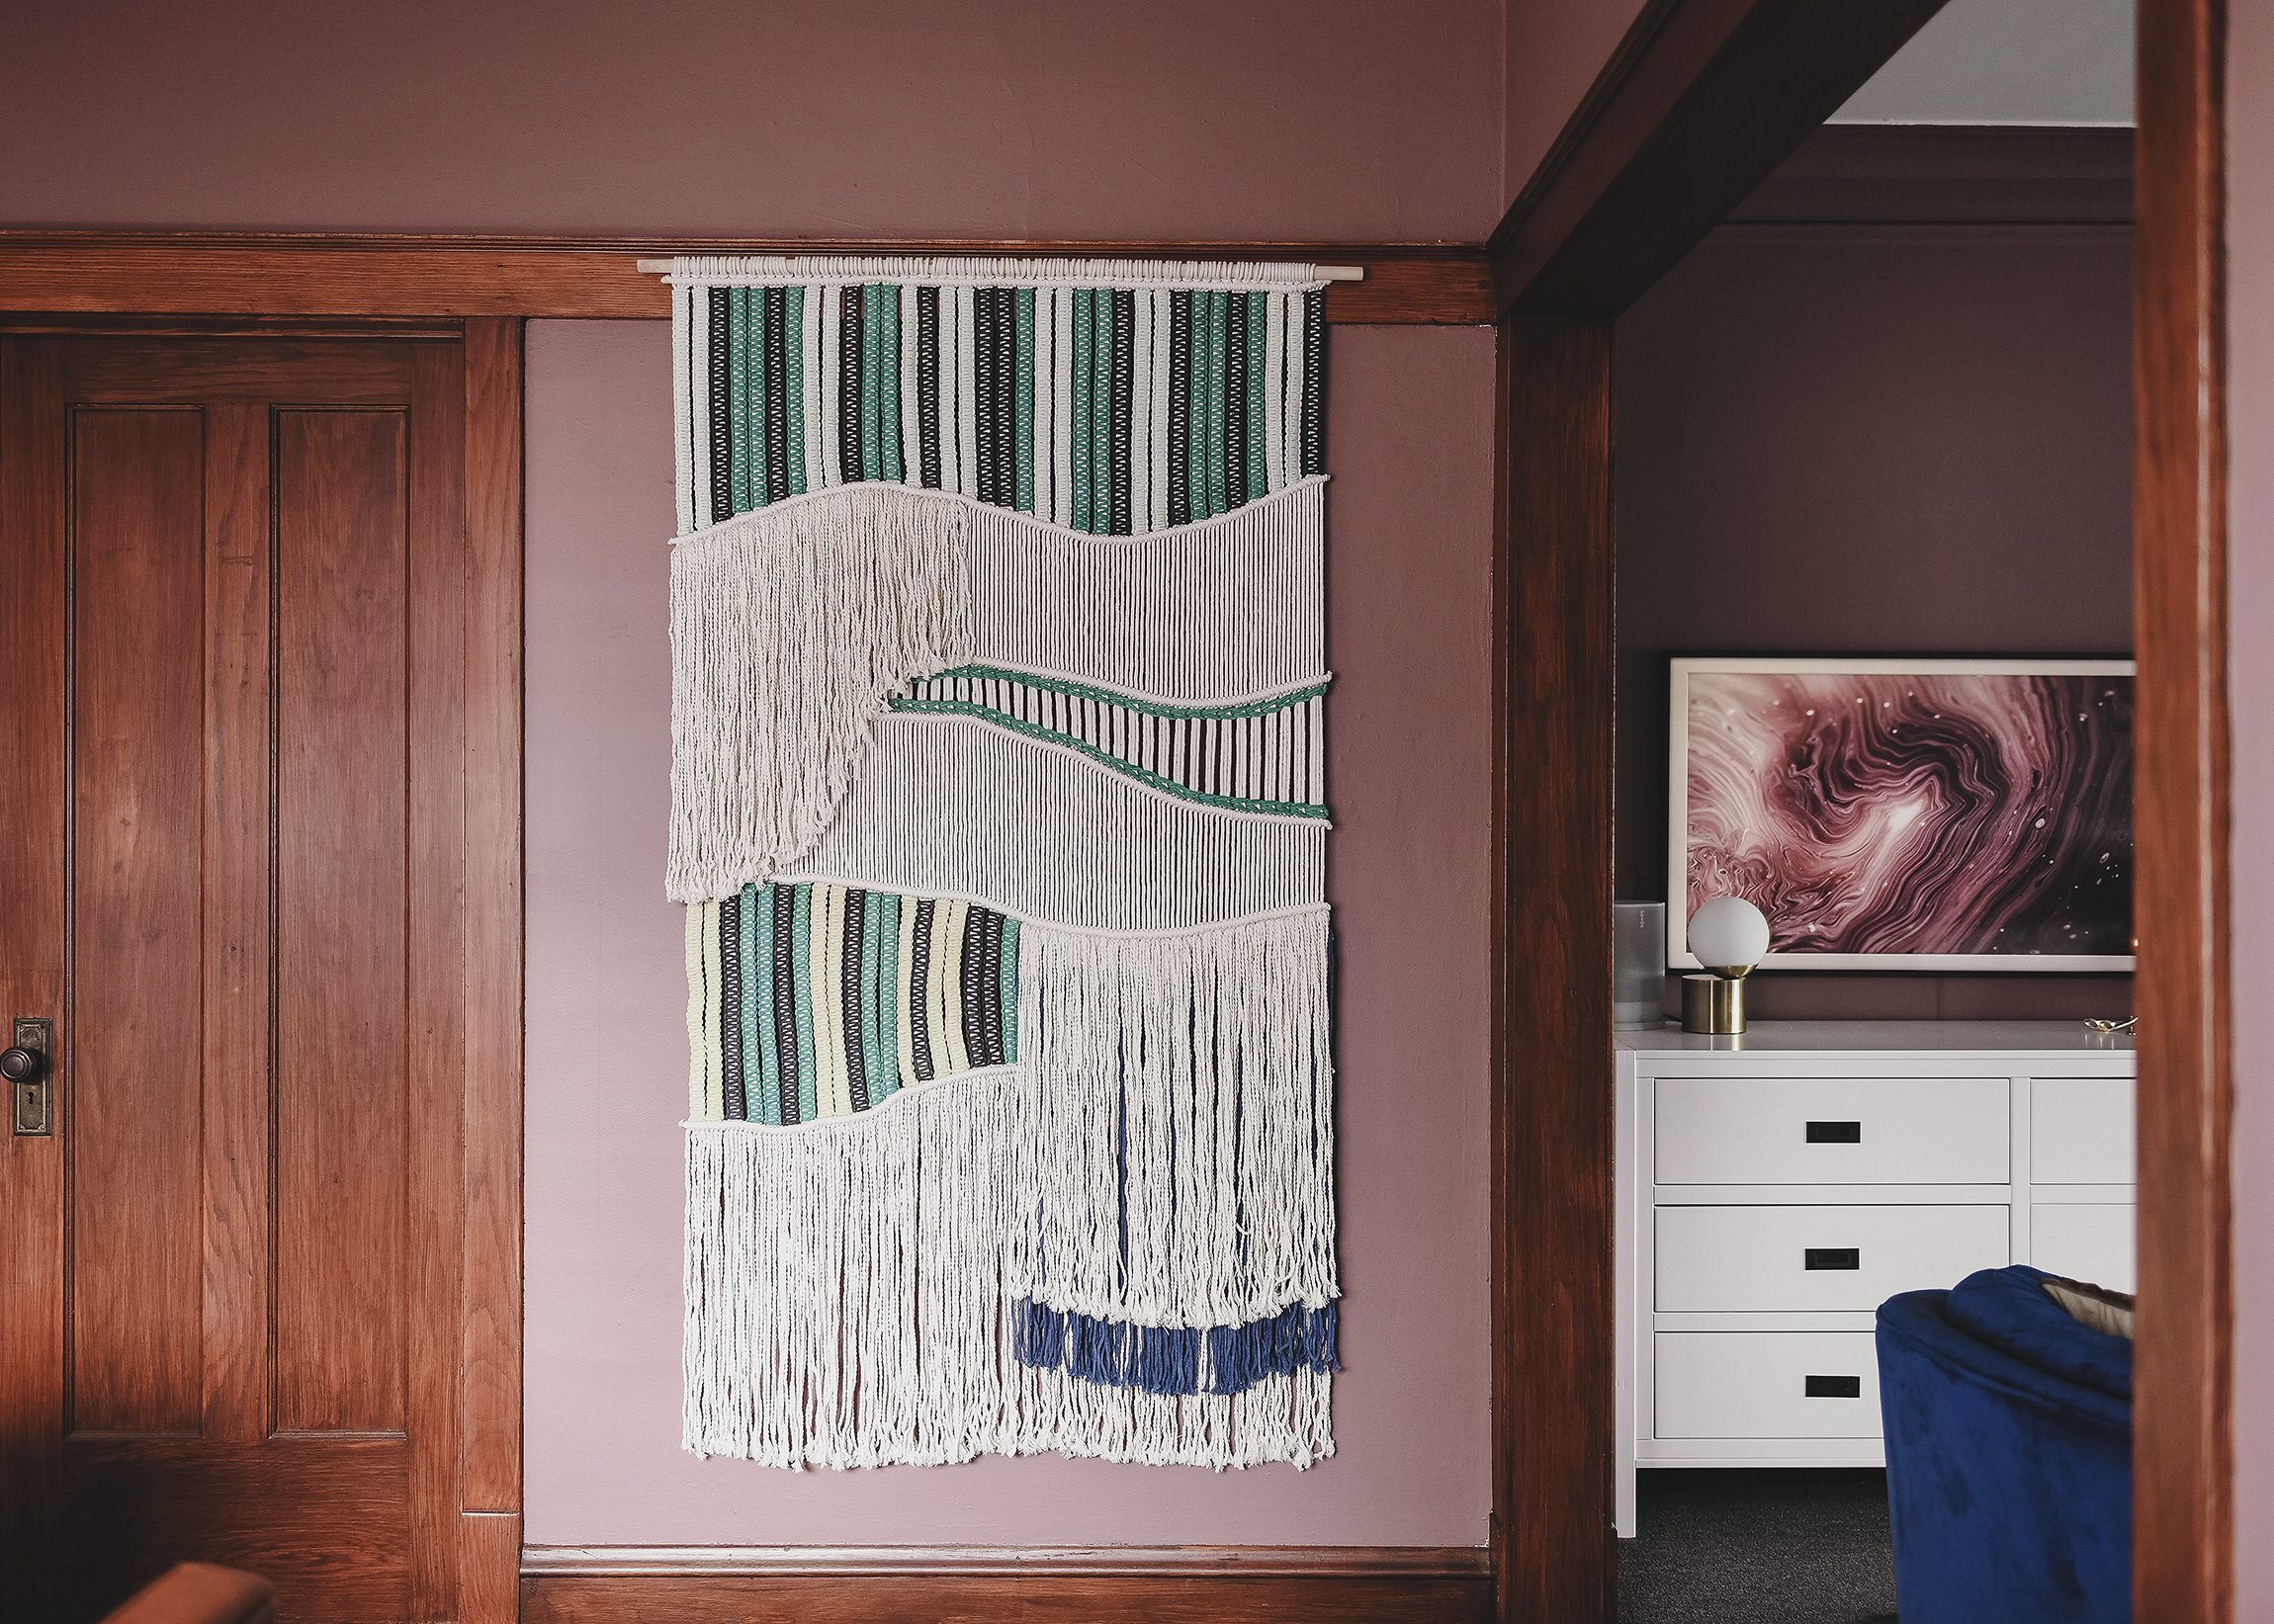 A fiber art piece ties the colors in each room together and unifies the spaces // via yellow brick home.